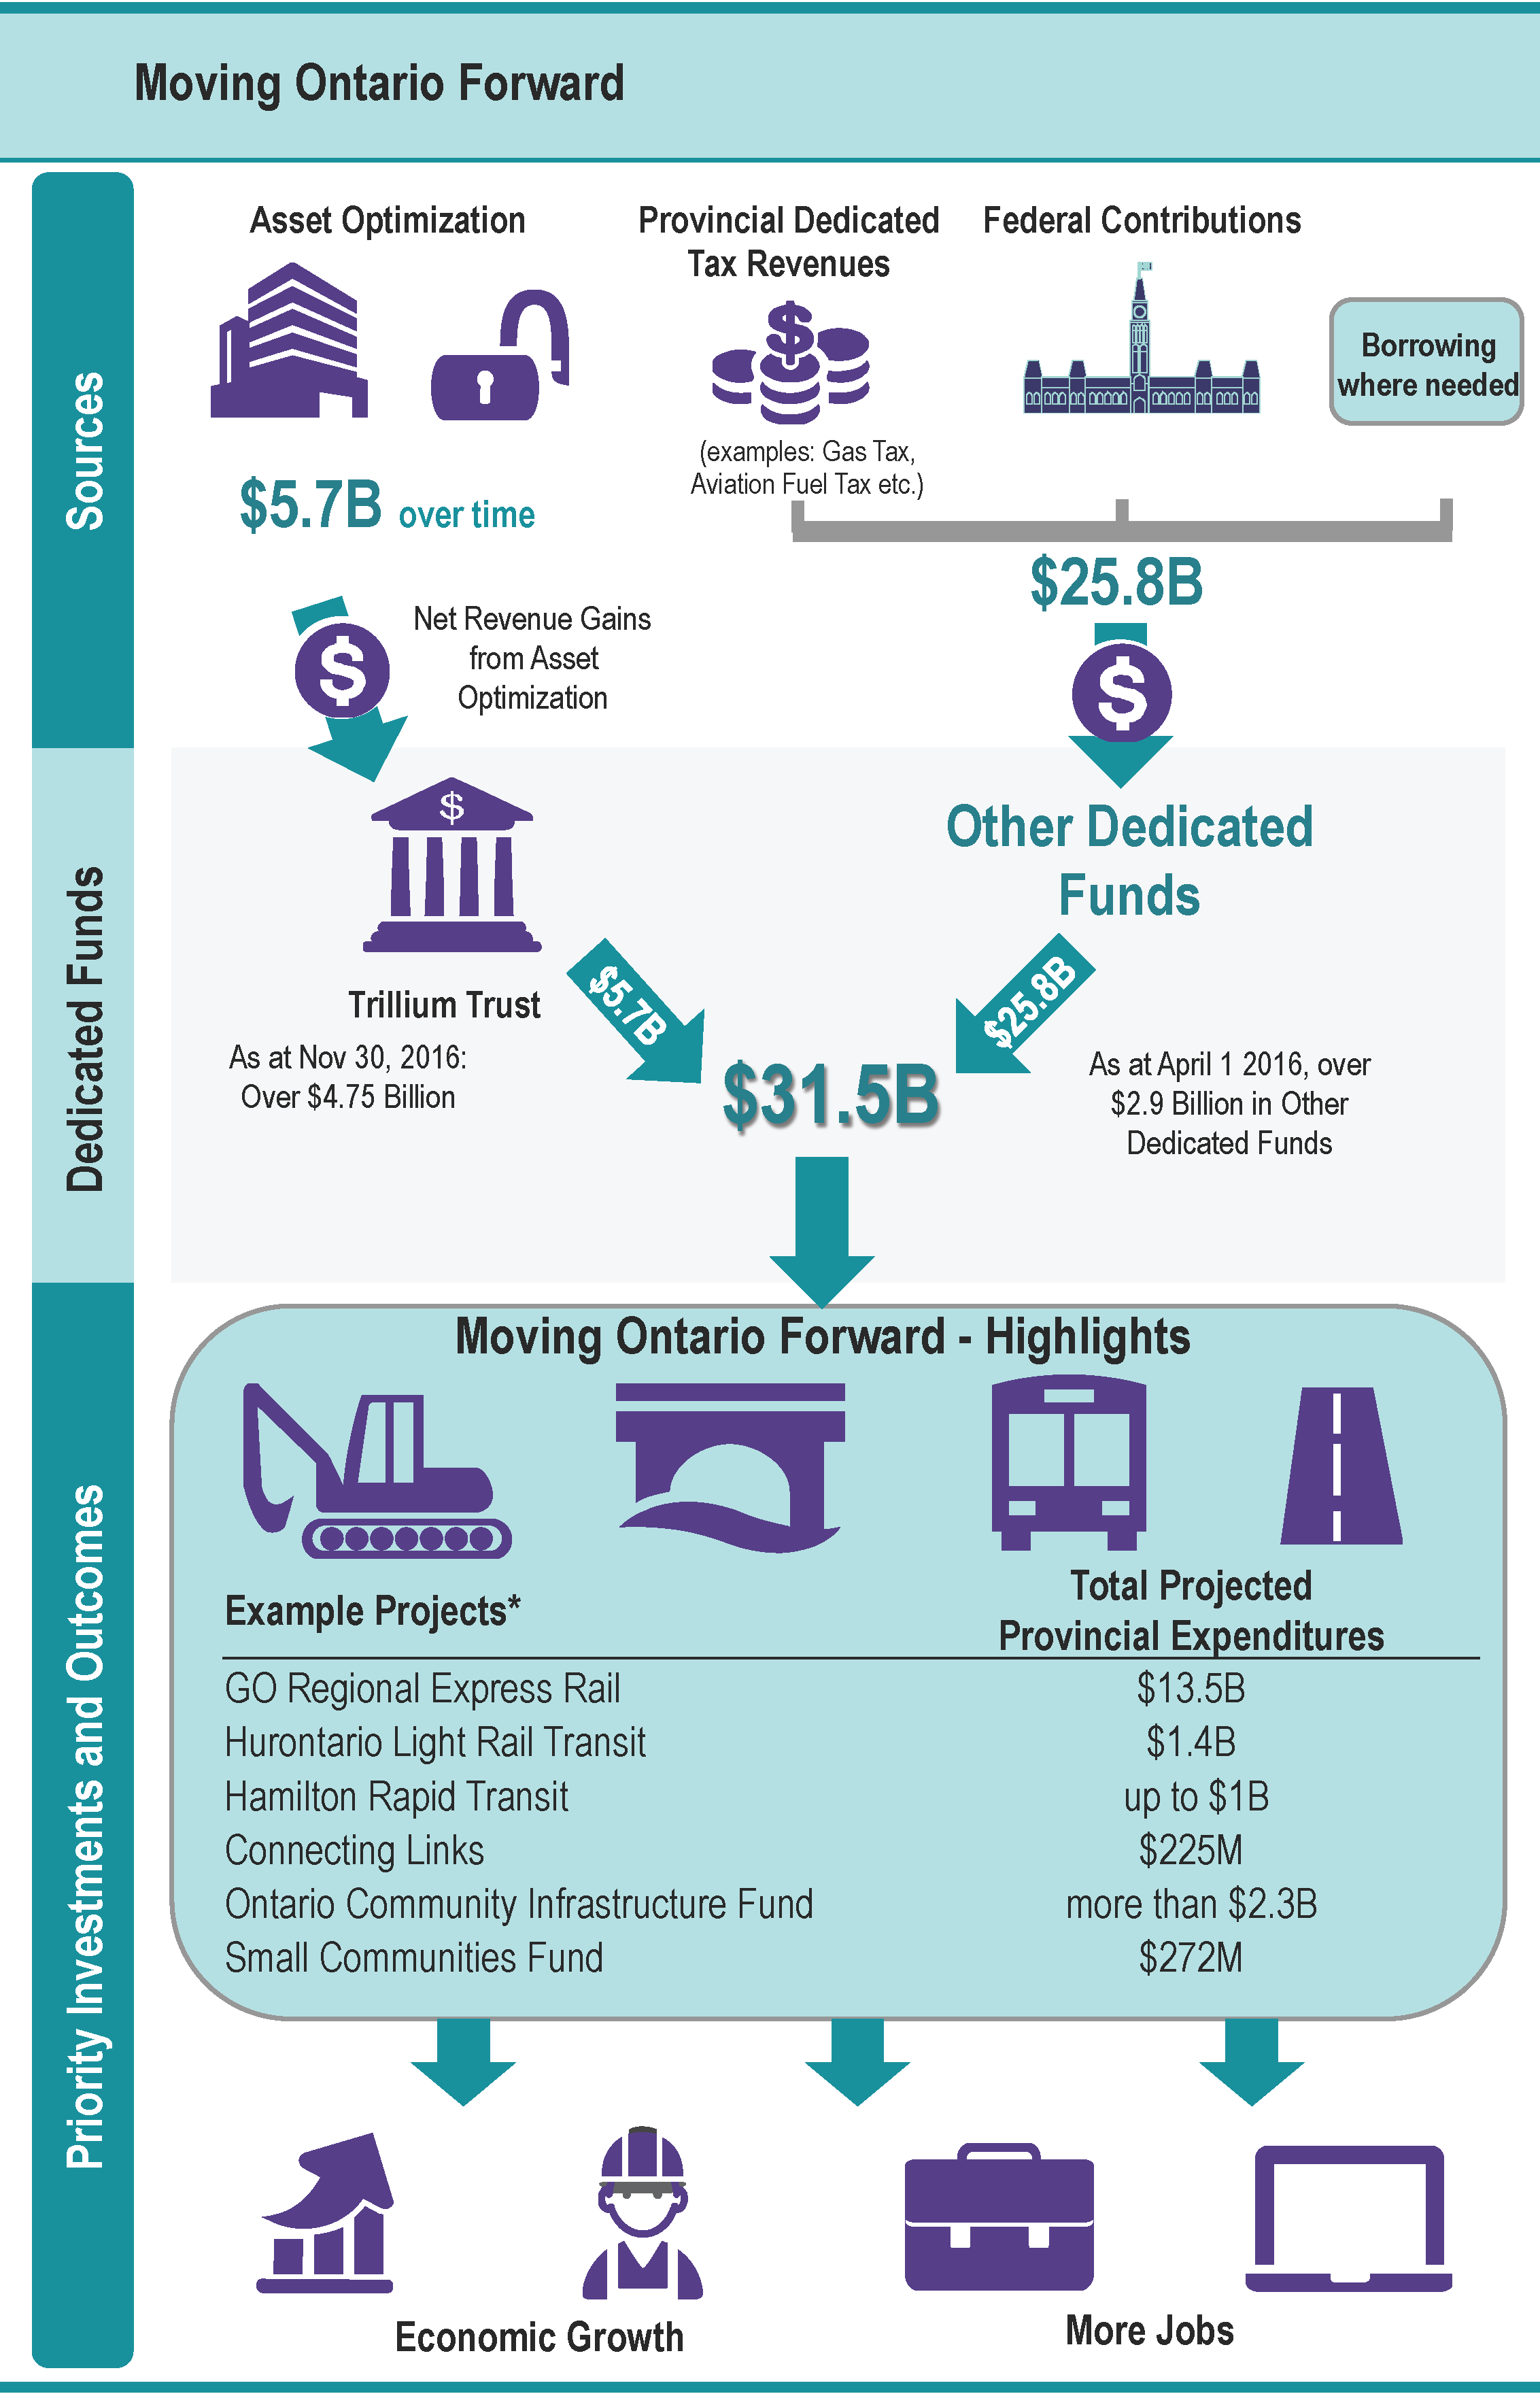 This chart illustrates how Moving Ontario Forward is funded and what its outcomes are. $31.5 billion in dedicated funds is generated from different sources, including net revenue gains from asset optimization, tax revenue, federal contributions and, if necessary, borrowing. The net revenue gains from asset optimization are credited to the Trillium Trust. Together, the Trillium Trust and other dedicated funds total $31.5 billion and will be invested in Moving Ontario Forward projects. Moving Ontario Forward investments will help support economic growth and job creation